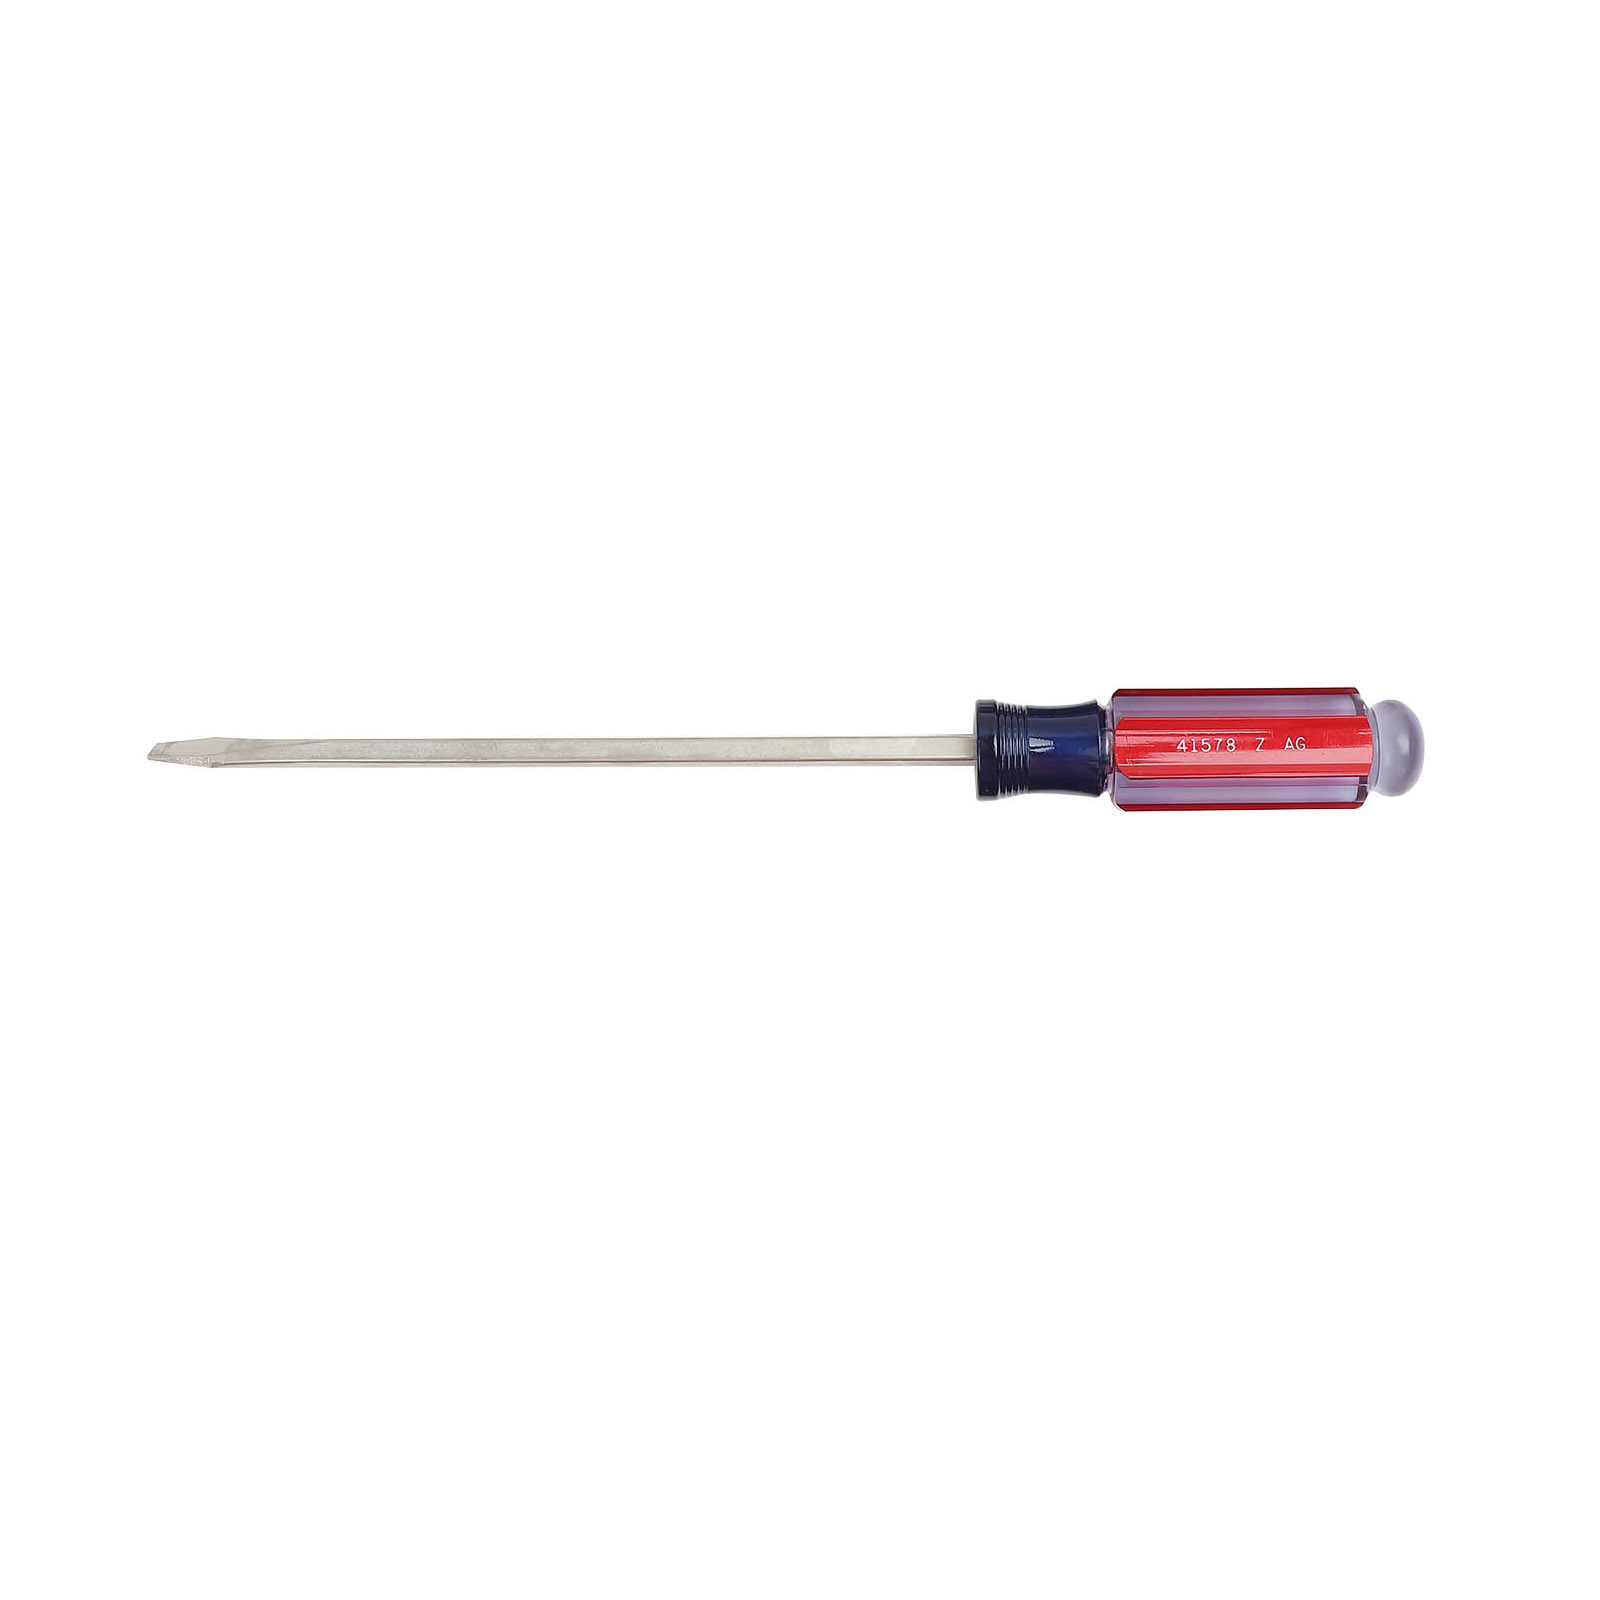 Craftsman Slotted 1/4 x 8 in Screwdriver